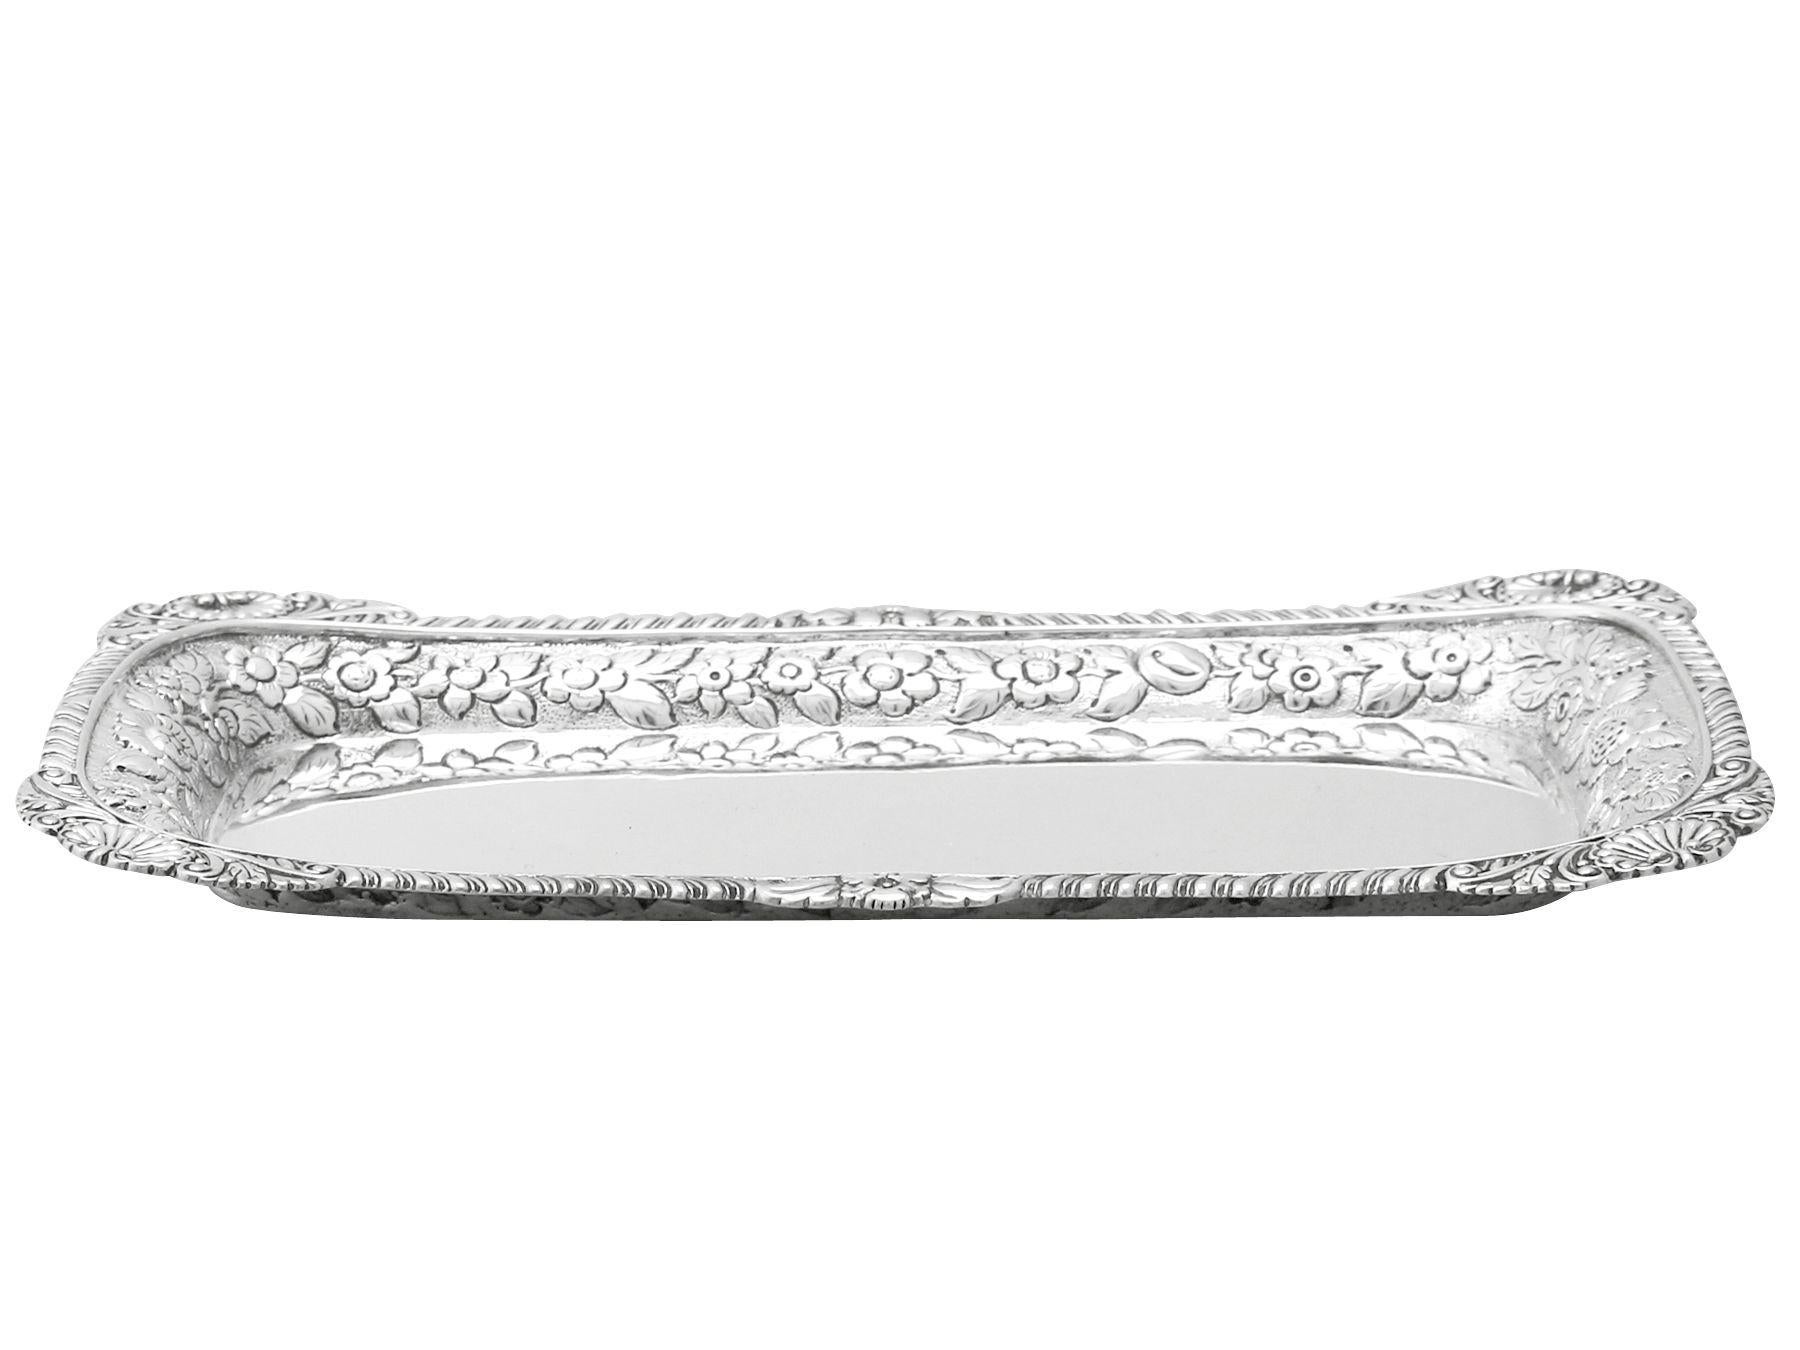 An excellent, fine and impressive antique Georgian English sterling silver snuffer/pen tray made by William Bateman I; an addition to our ornamental silverware collection.

This exceptional antique George III sterling silver snuffer tray has a